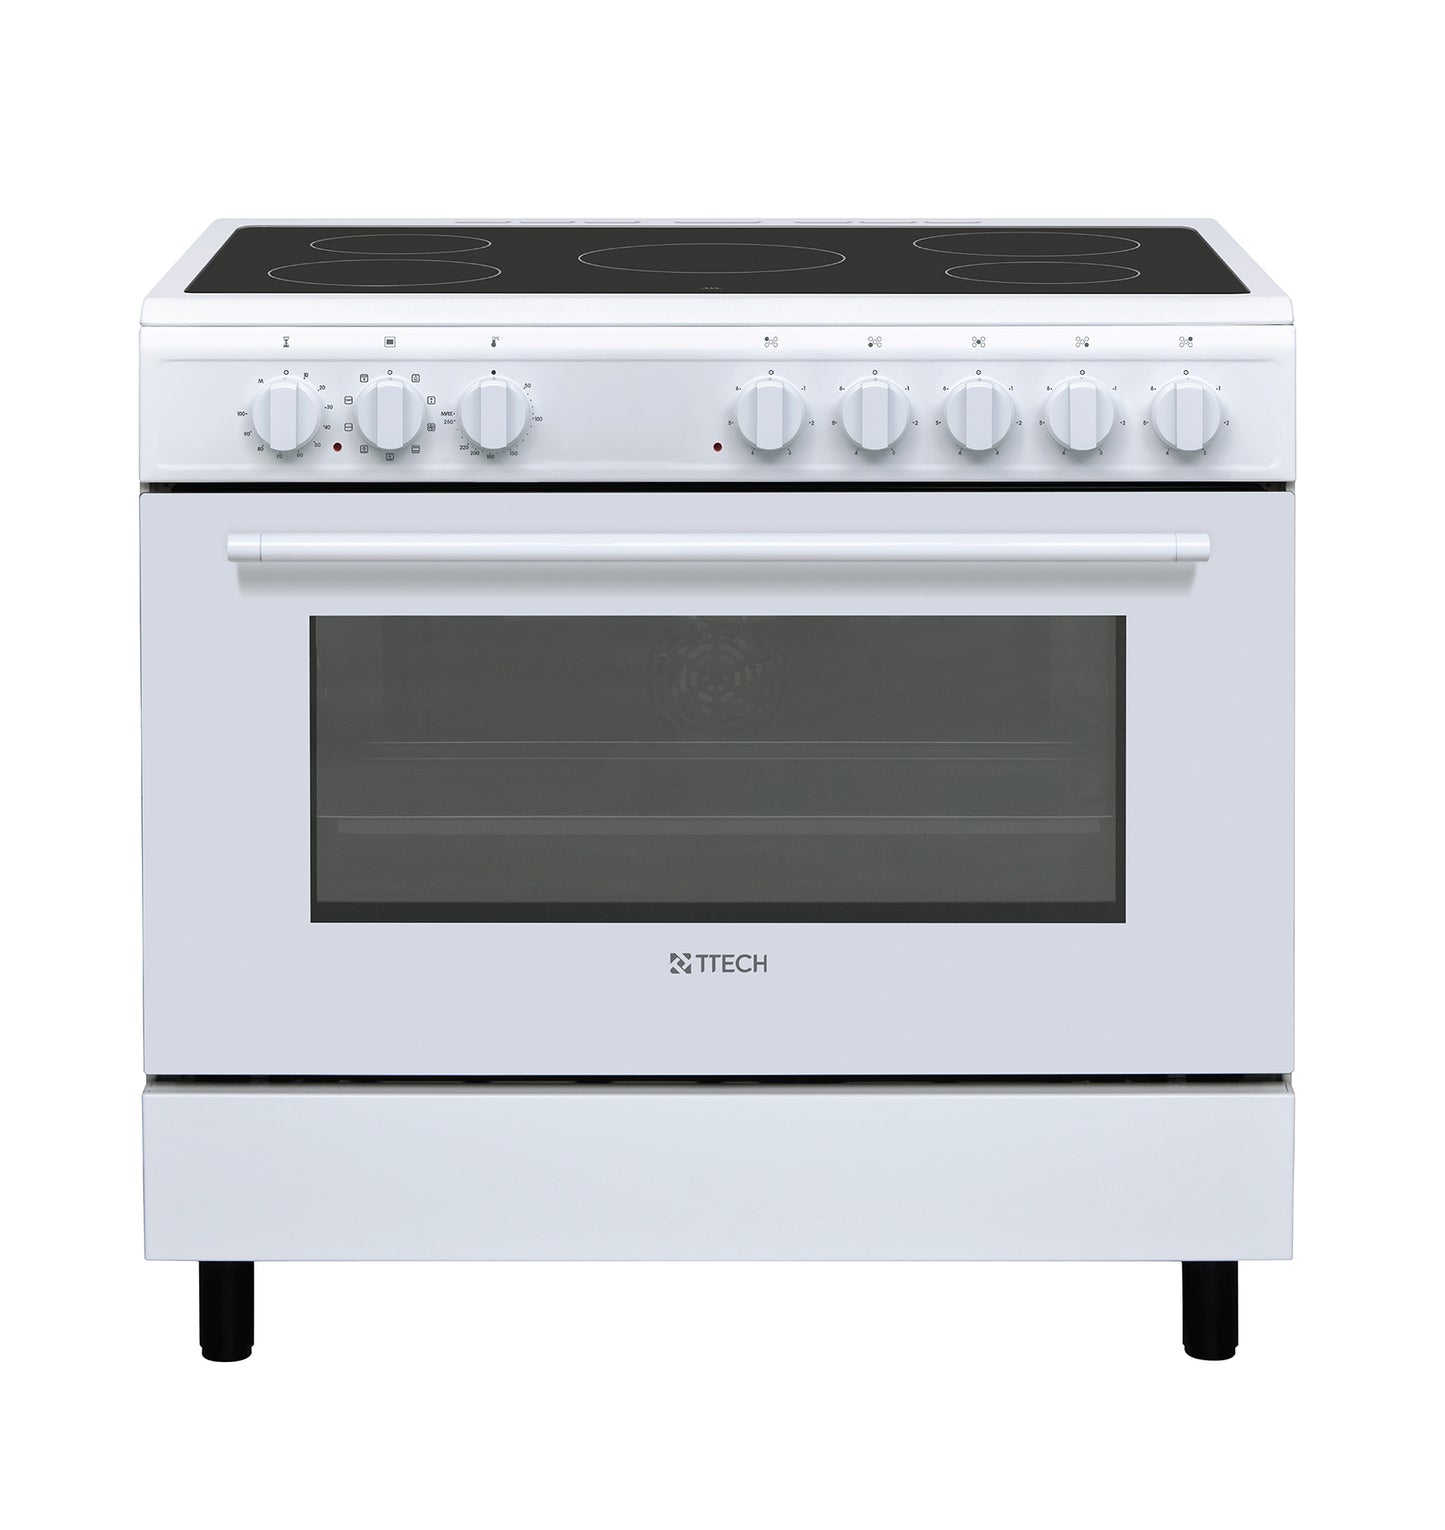 T-TECH FREE STANDING 90X60 ELECTRIC COOKER WITH CERAMIC HOB STANDARD WHITE COLOR, MODEL